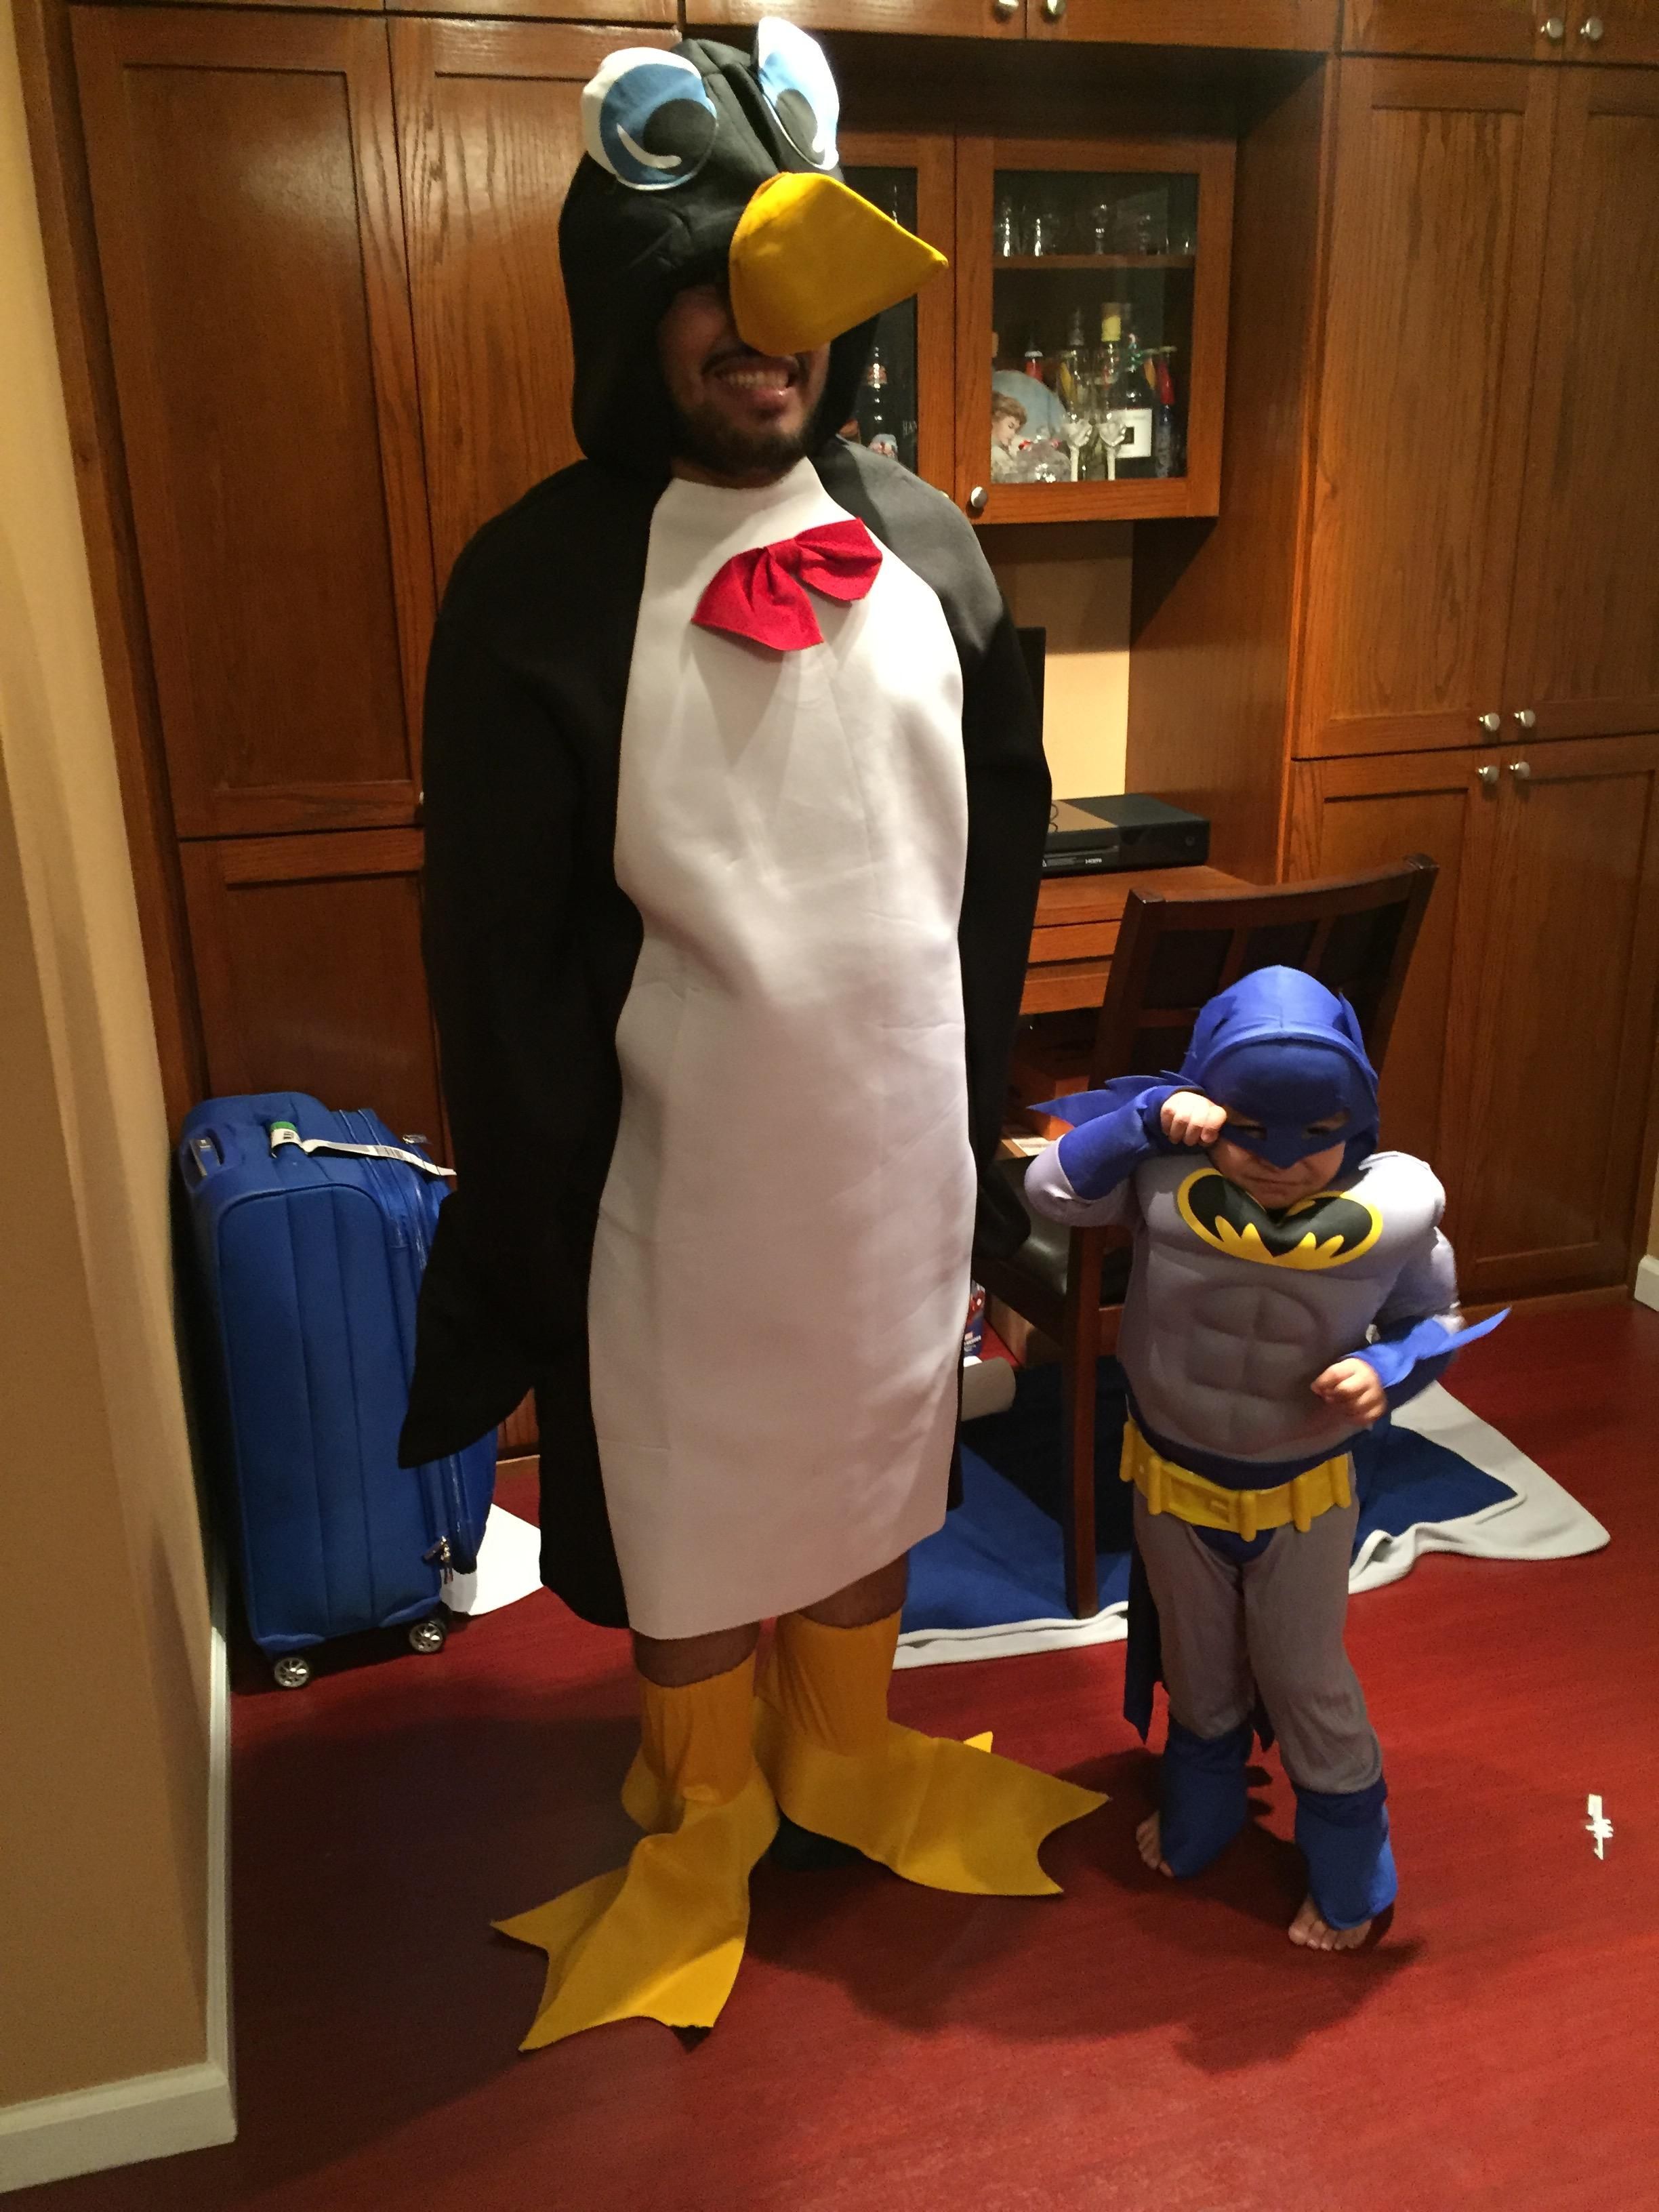 My son wanted to be Batman for Halloween and asked if I could be Penguin with him. Naturally, I obliged.